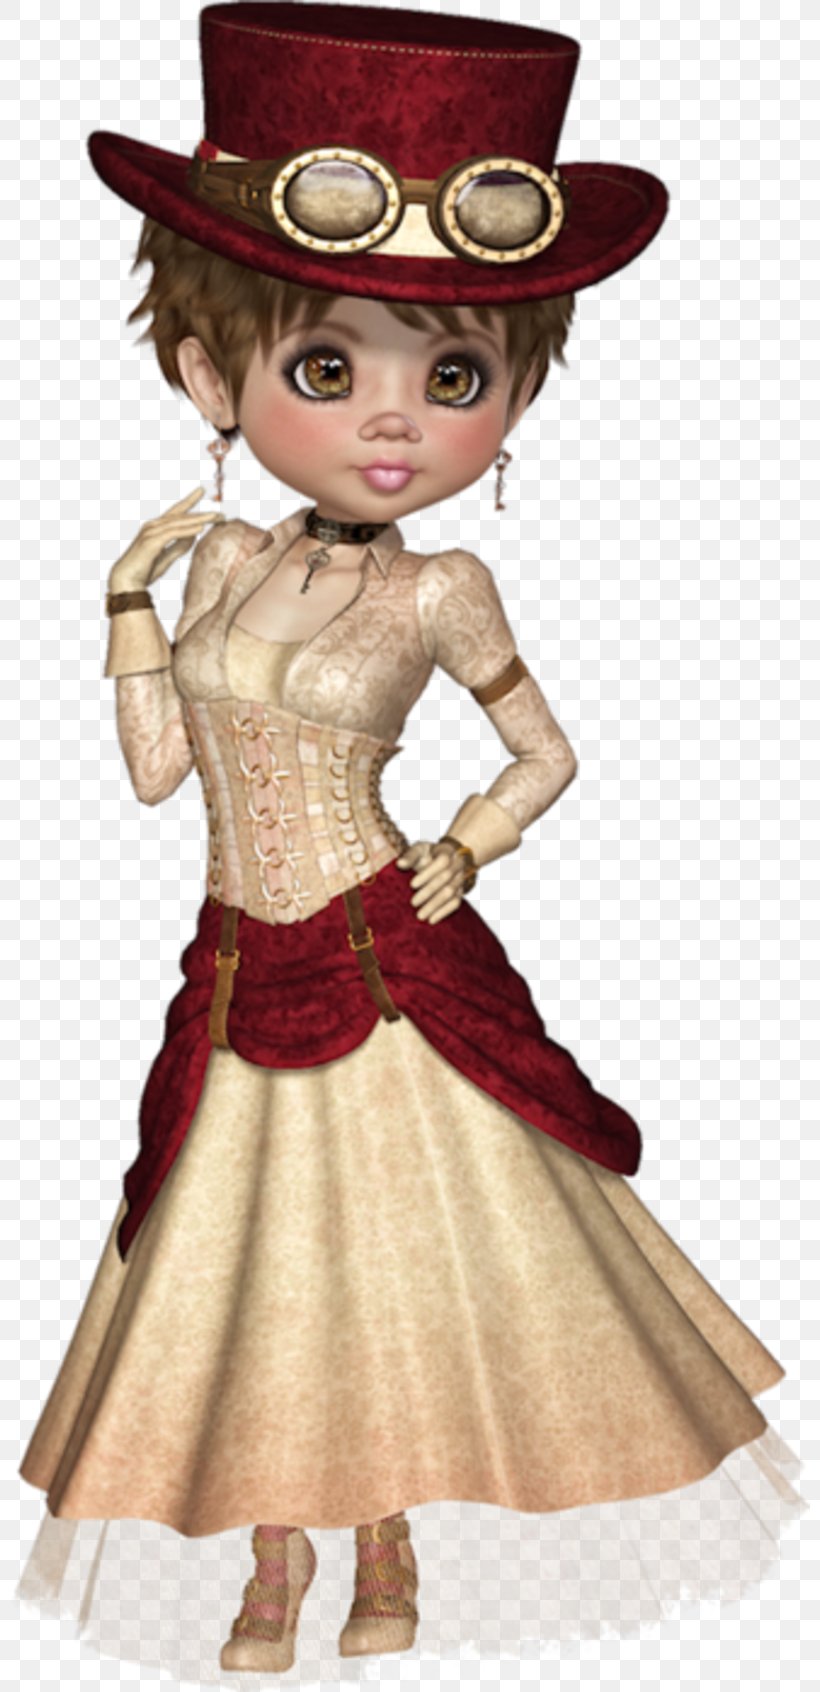 Costume Design Doll, PNG, 800x1692px, Costume Design, Costume, Doll, Toddler Download Free